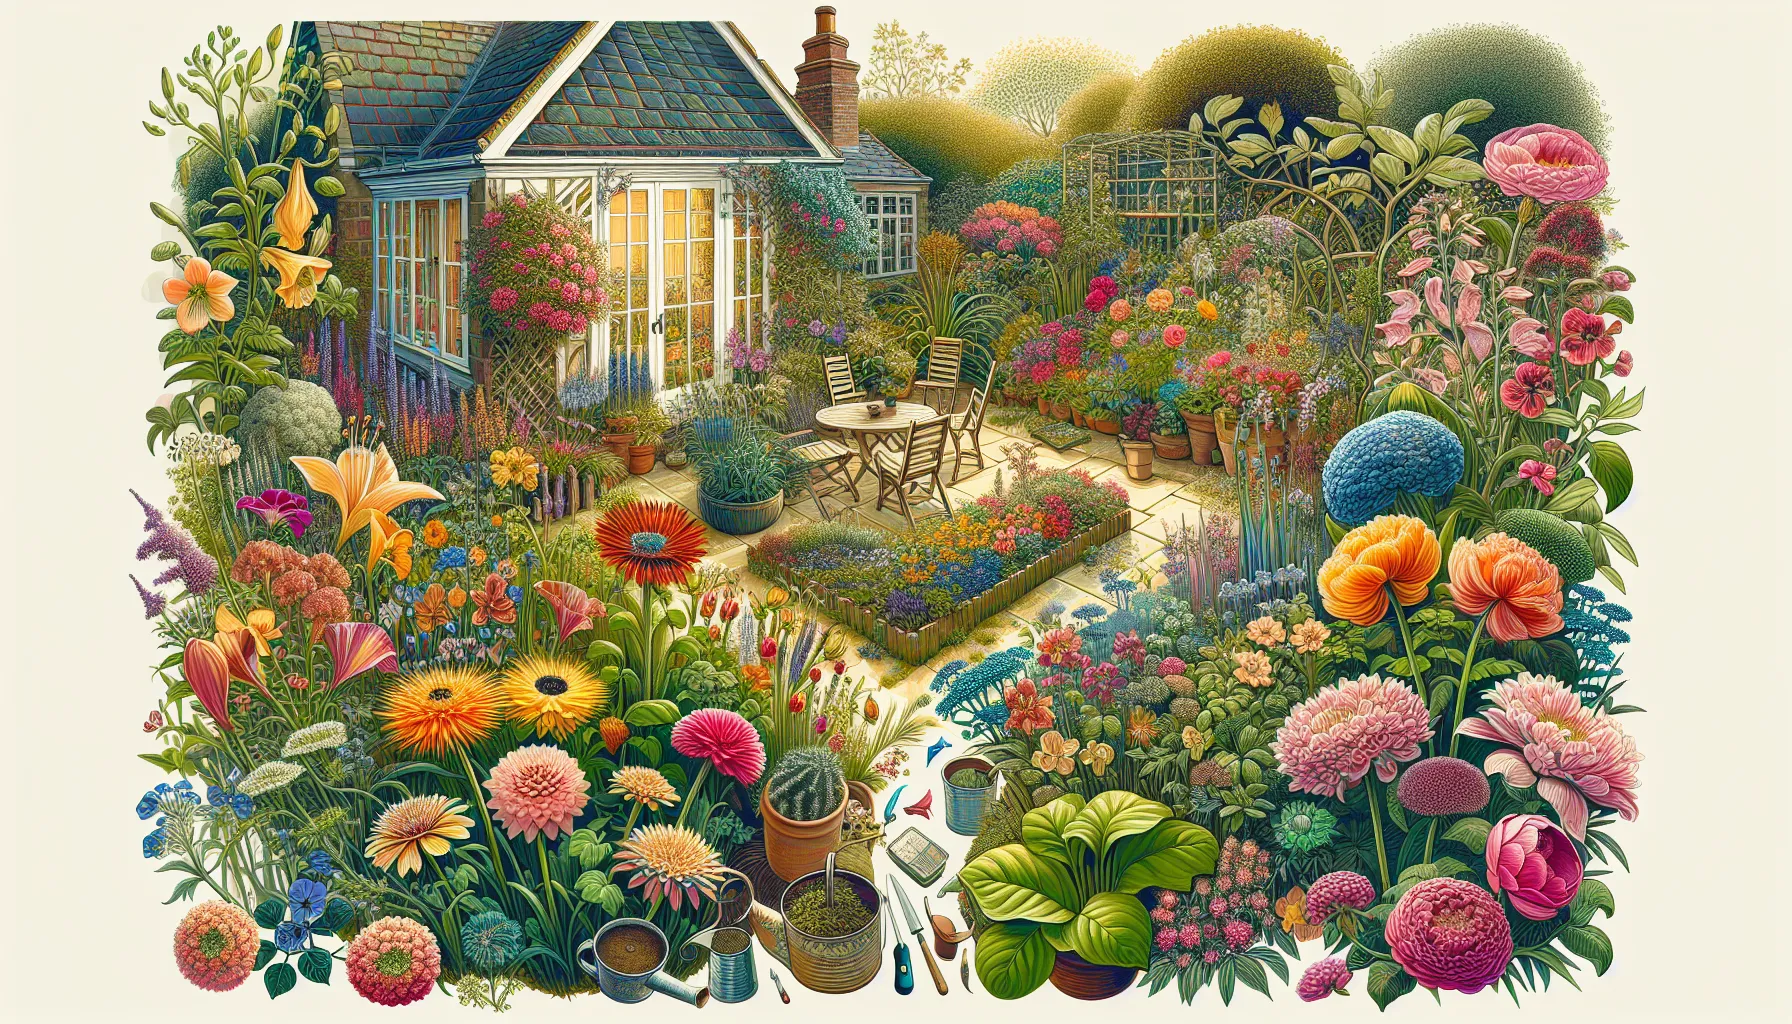 A vibrant illustration of a diverse array of yard flowers blooming around a quaint garden with a glasshouse and a seating area.